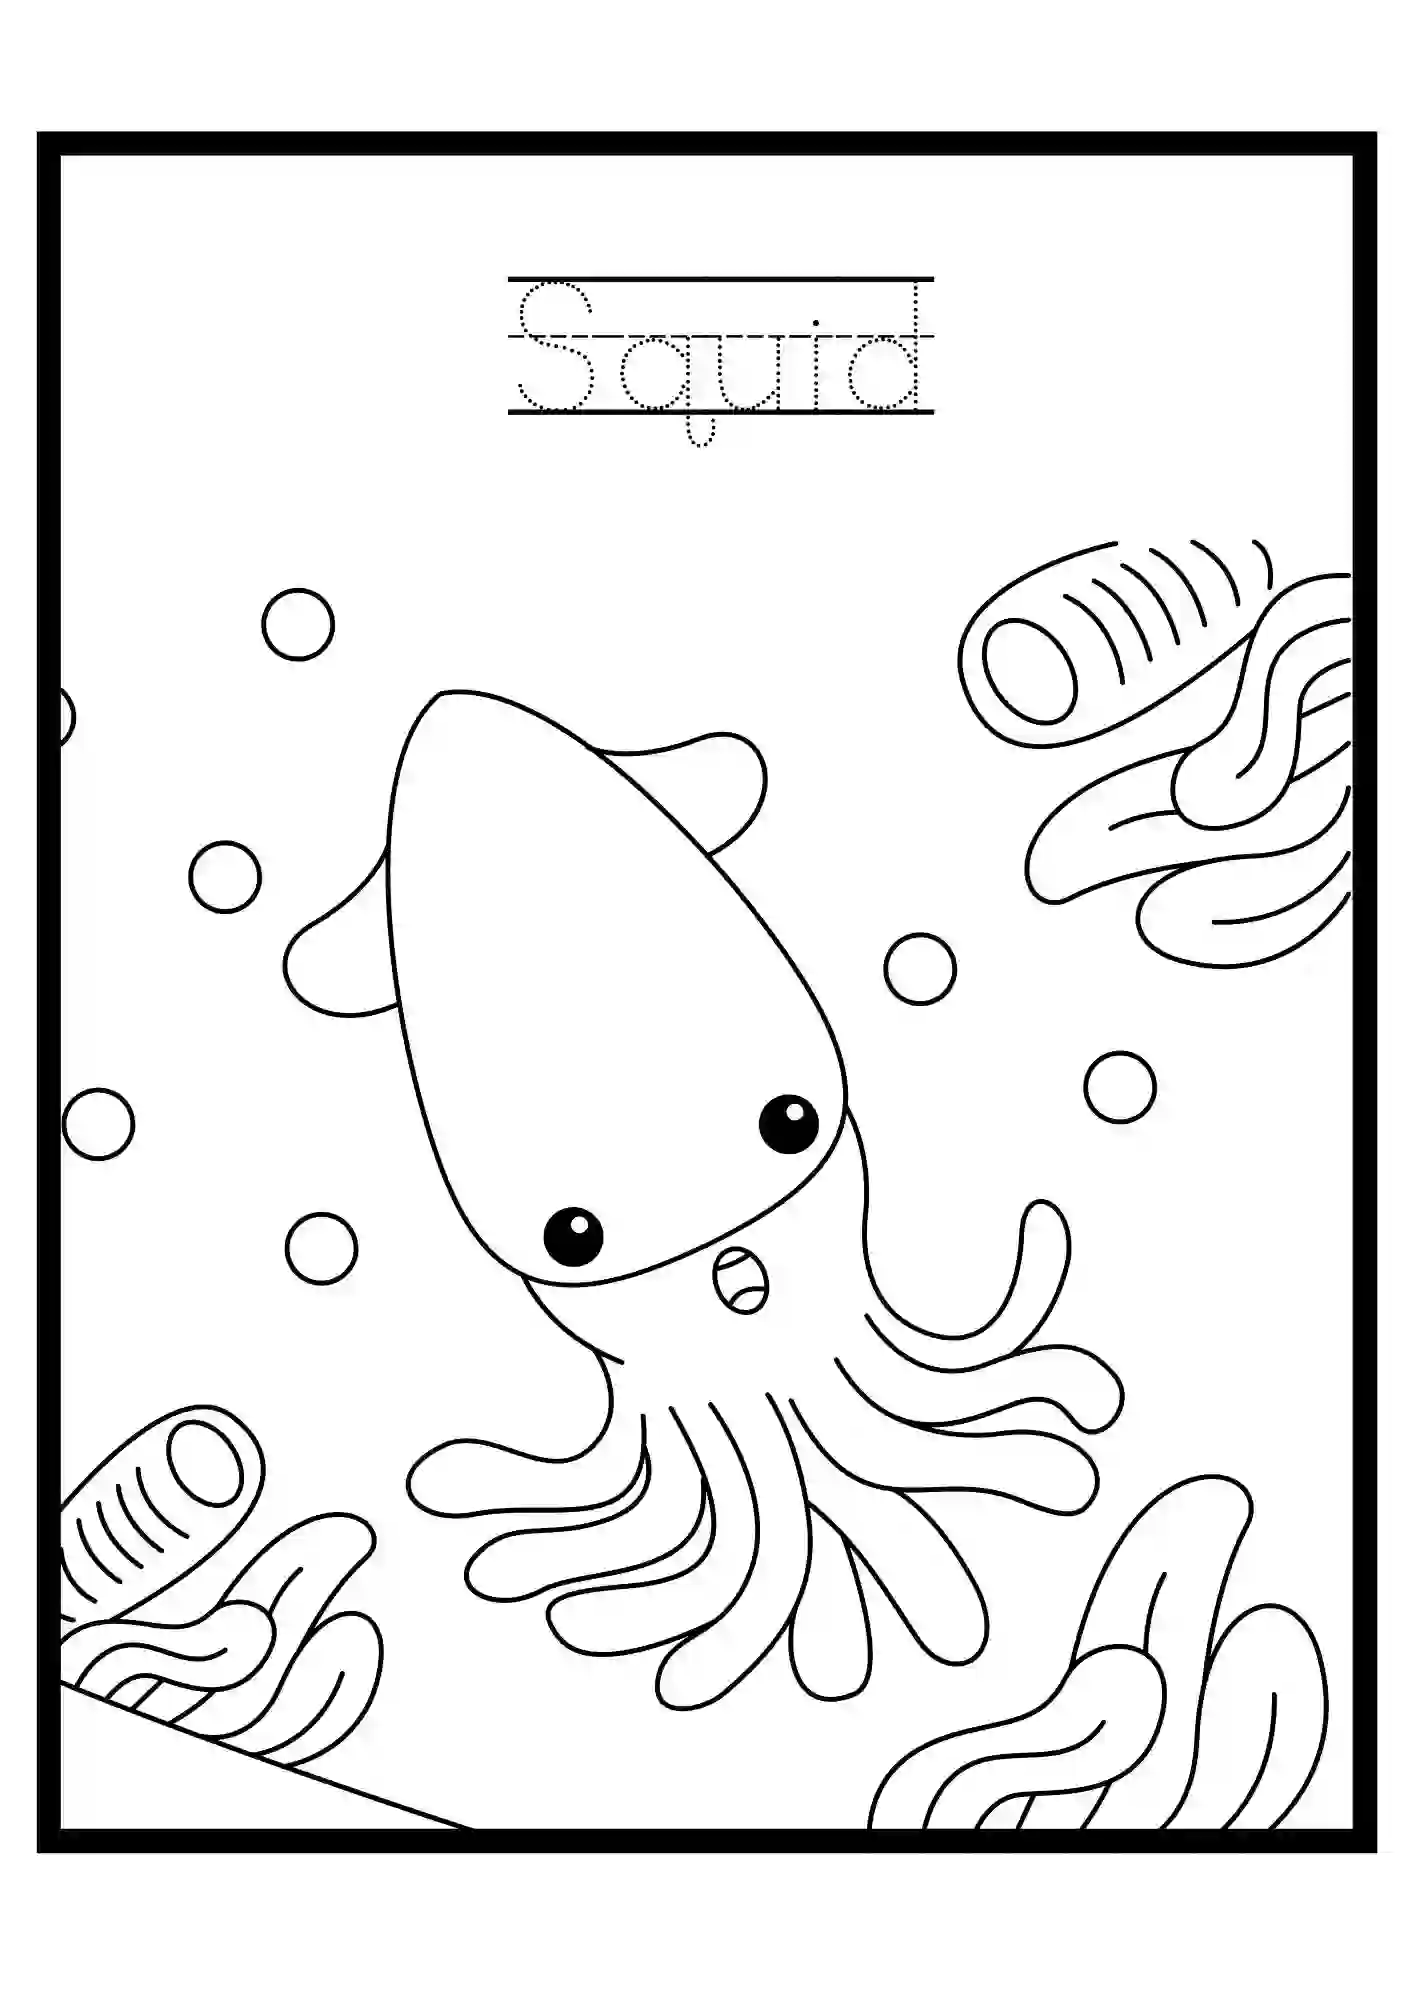 Under the Water Colouring Worksheets quid